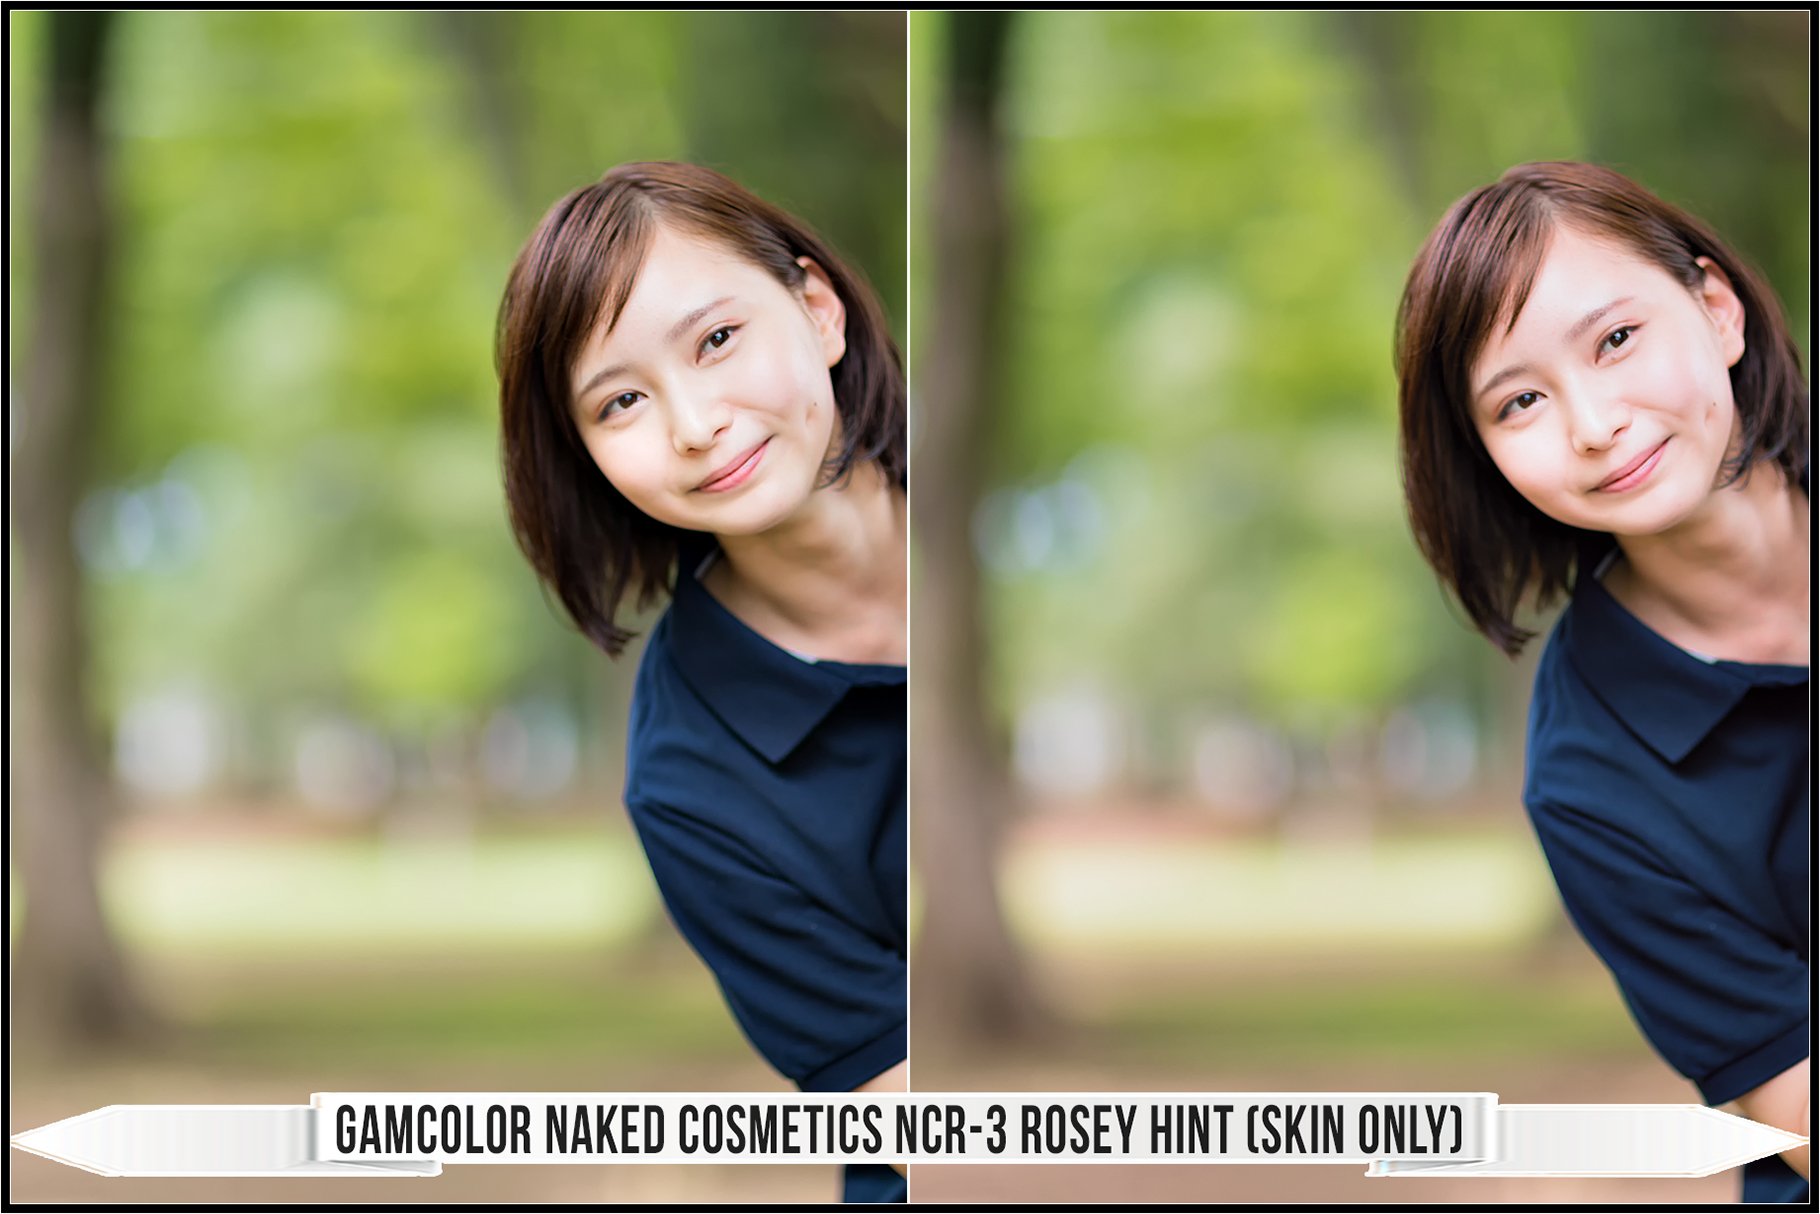 gamcolor naked cosmetics ncr 3 rosey hint 28skin only29 961